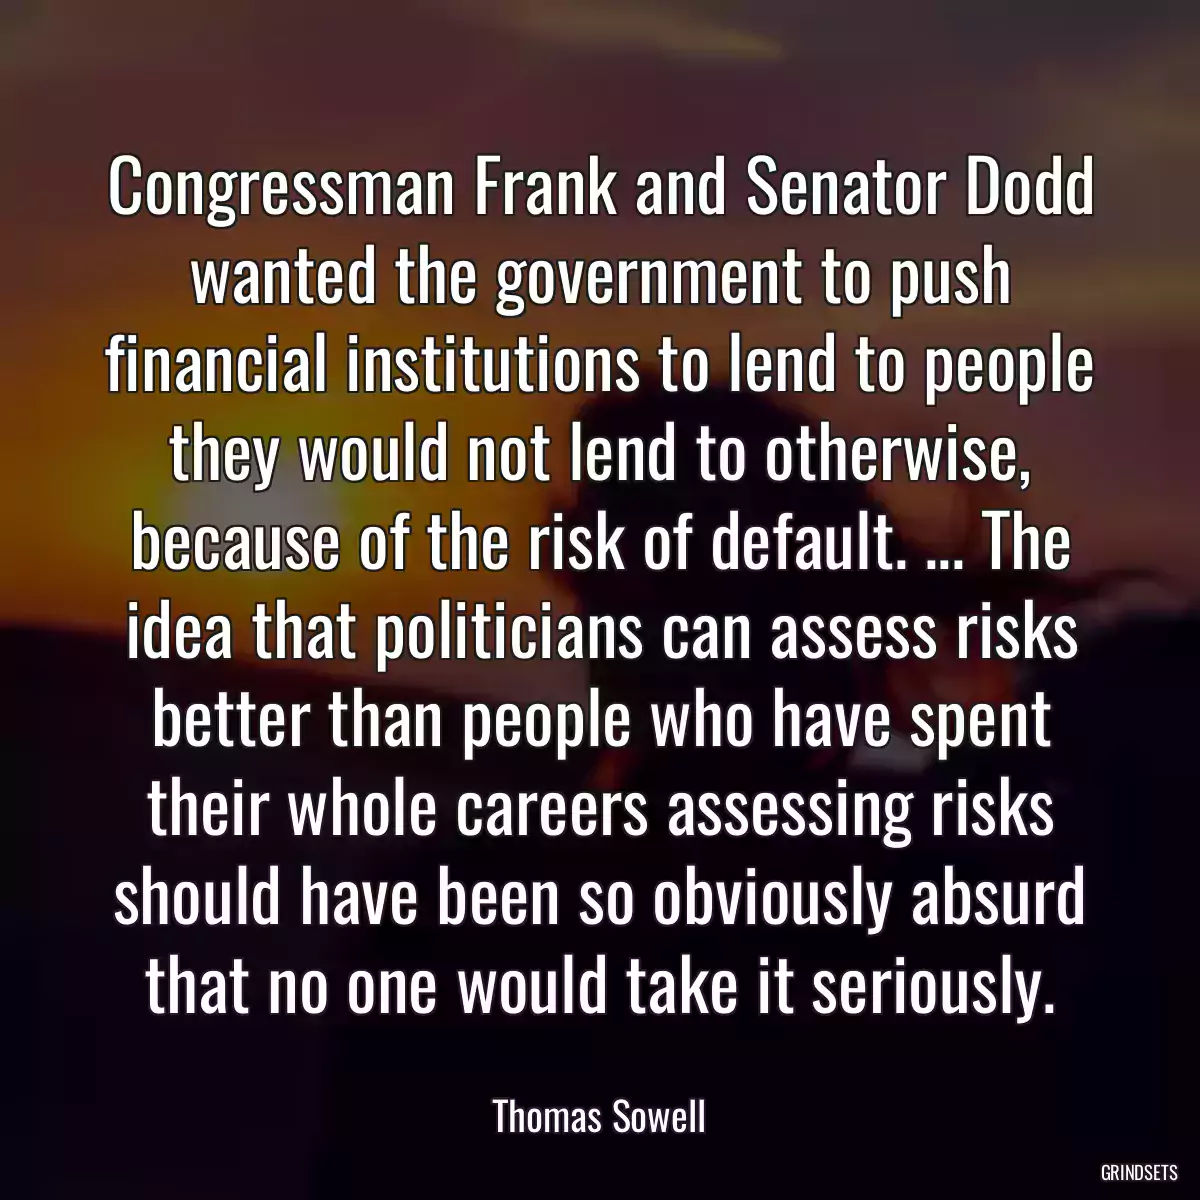 Congressman Frank and Senator Dodd wanted the government to push financial institutions to lend to people they would not lend to otherwise, because of the risk of default. ... The idea that politicians can assess risks better than people who have spent their whole careers assessing risks should have been so obviously absurd that no one would take it seriously.